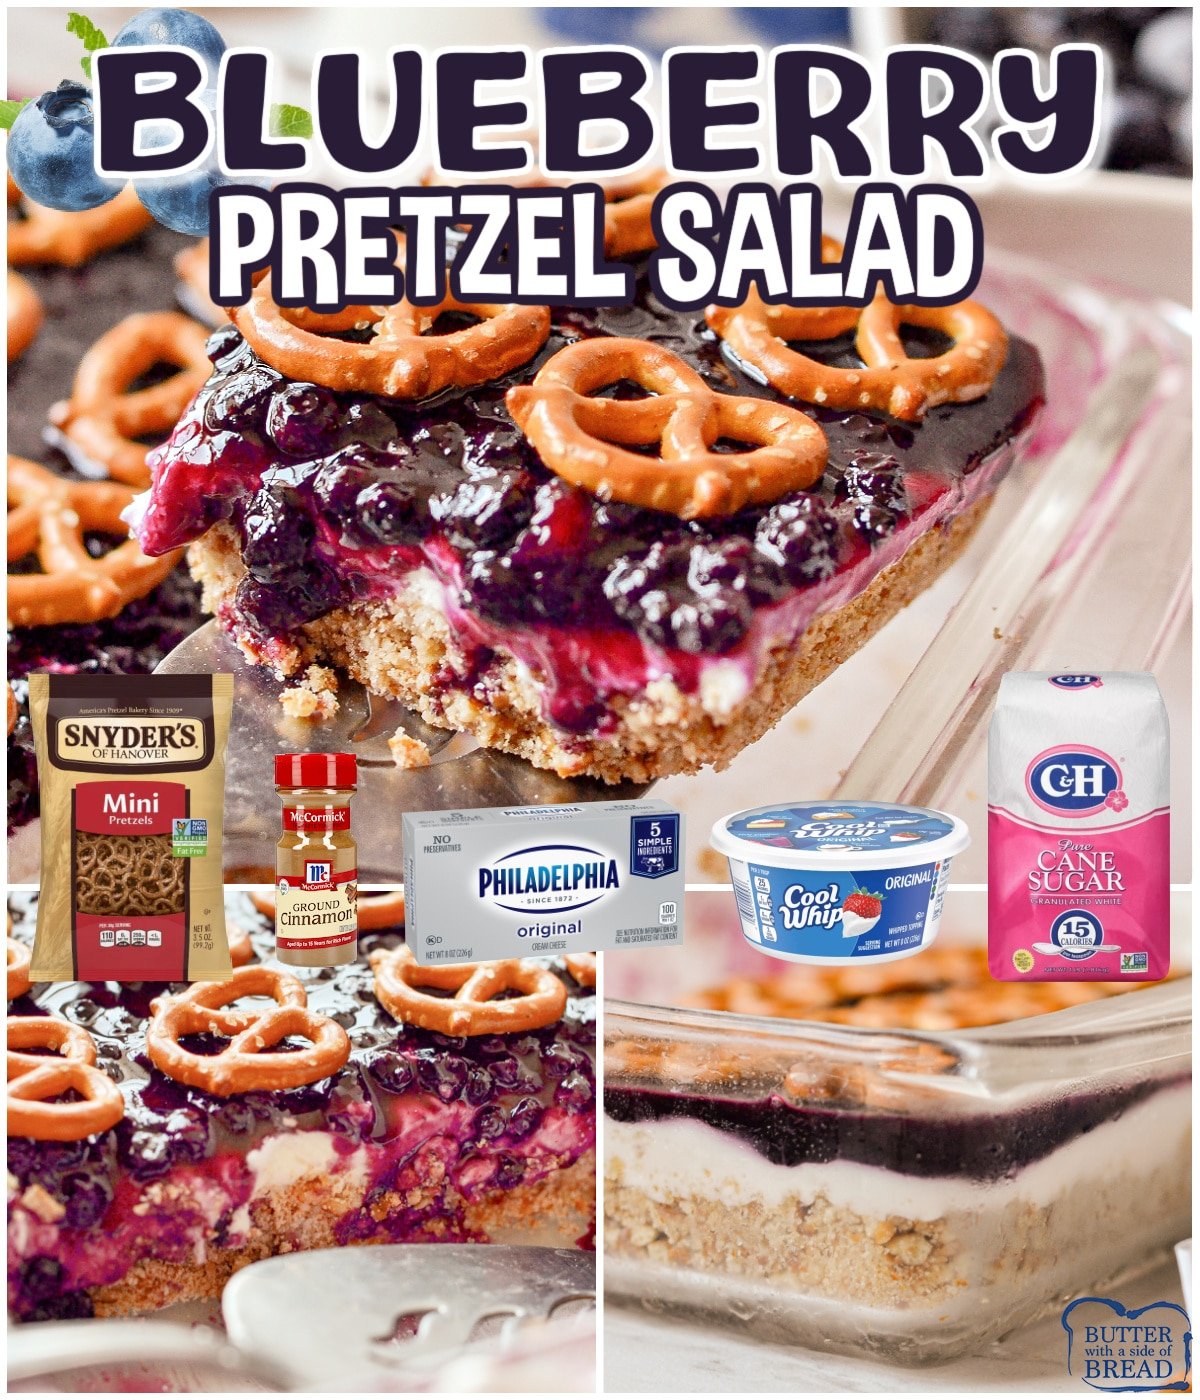 Blueberry Pretzel Salad is a delicious dessert that combines the salty crunch of pretzels with the sweet and tangy flavors of cream cheese and blueberries. This refreshing dessert is perfect for summer BBQs, birthday parties, and holiday dinner parties.